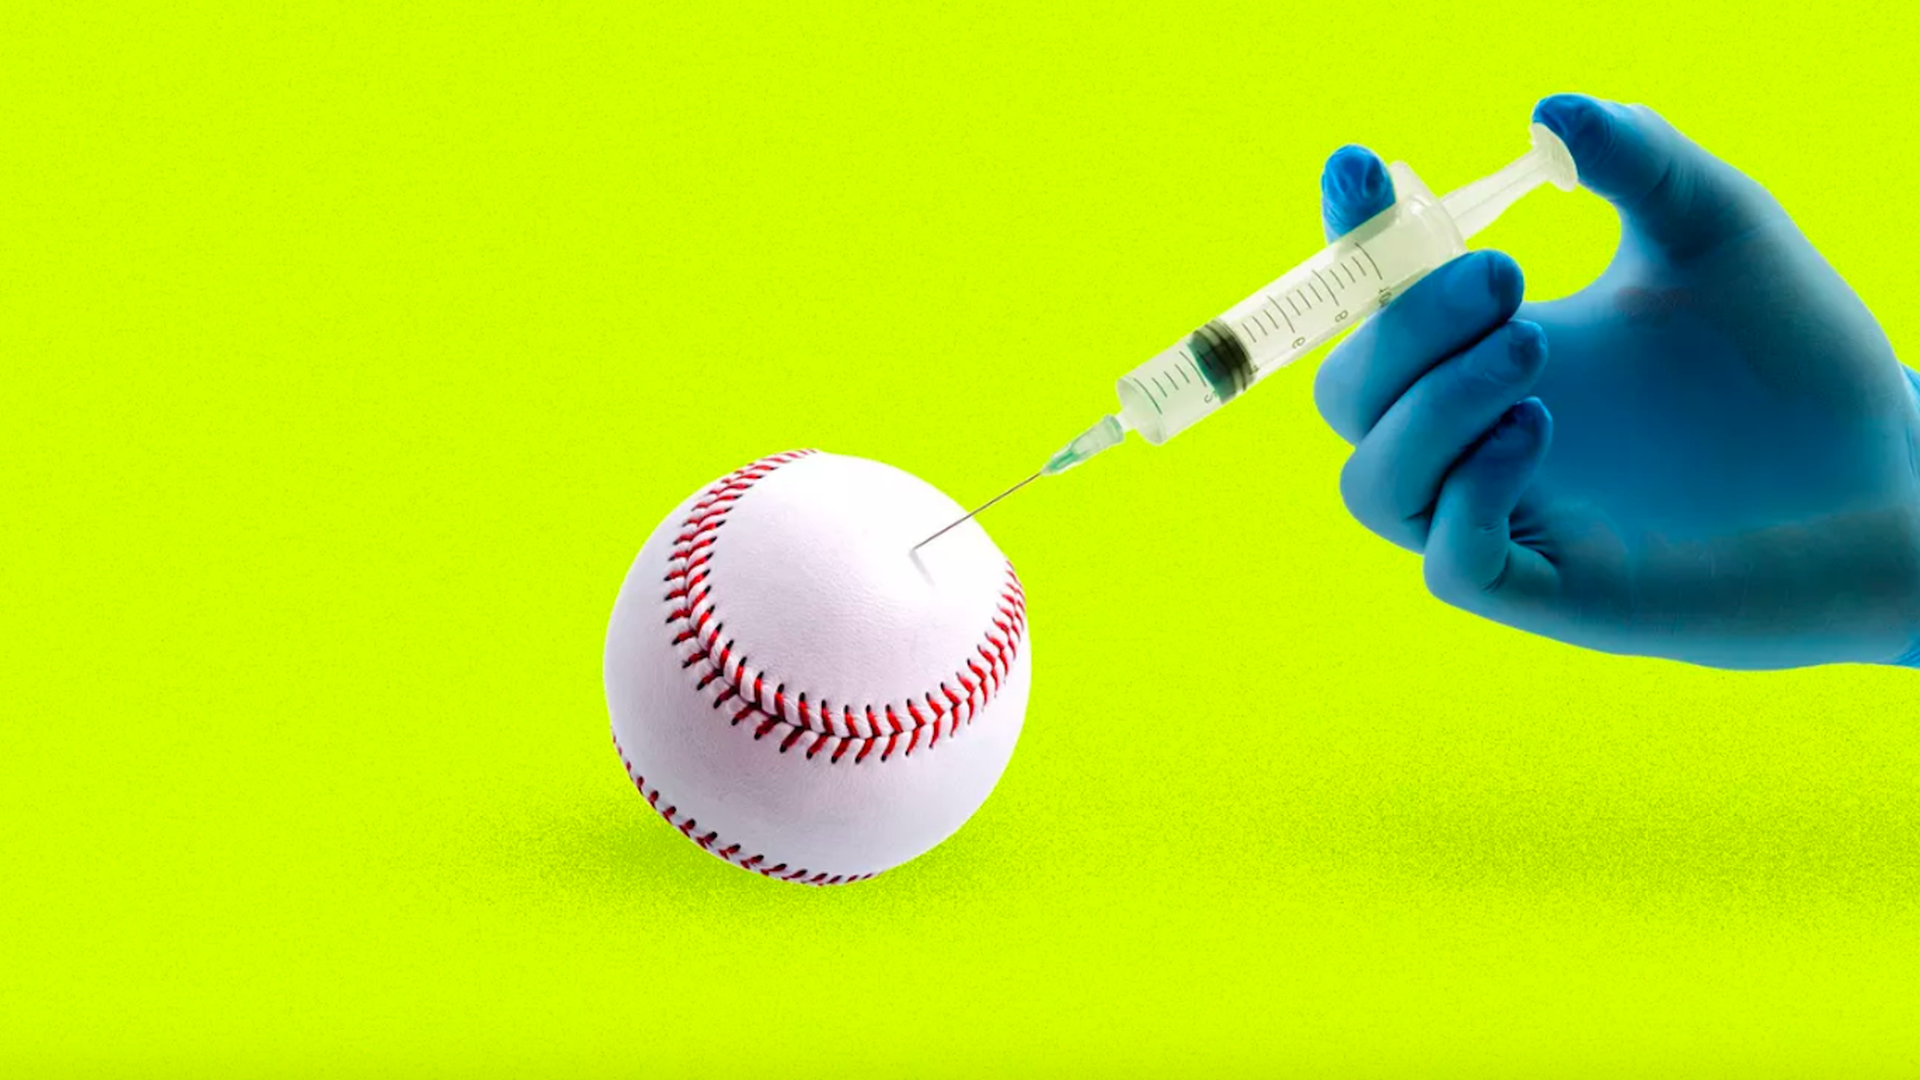 Injecting something into a baseball